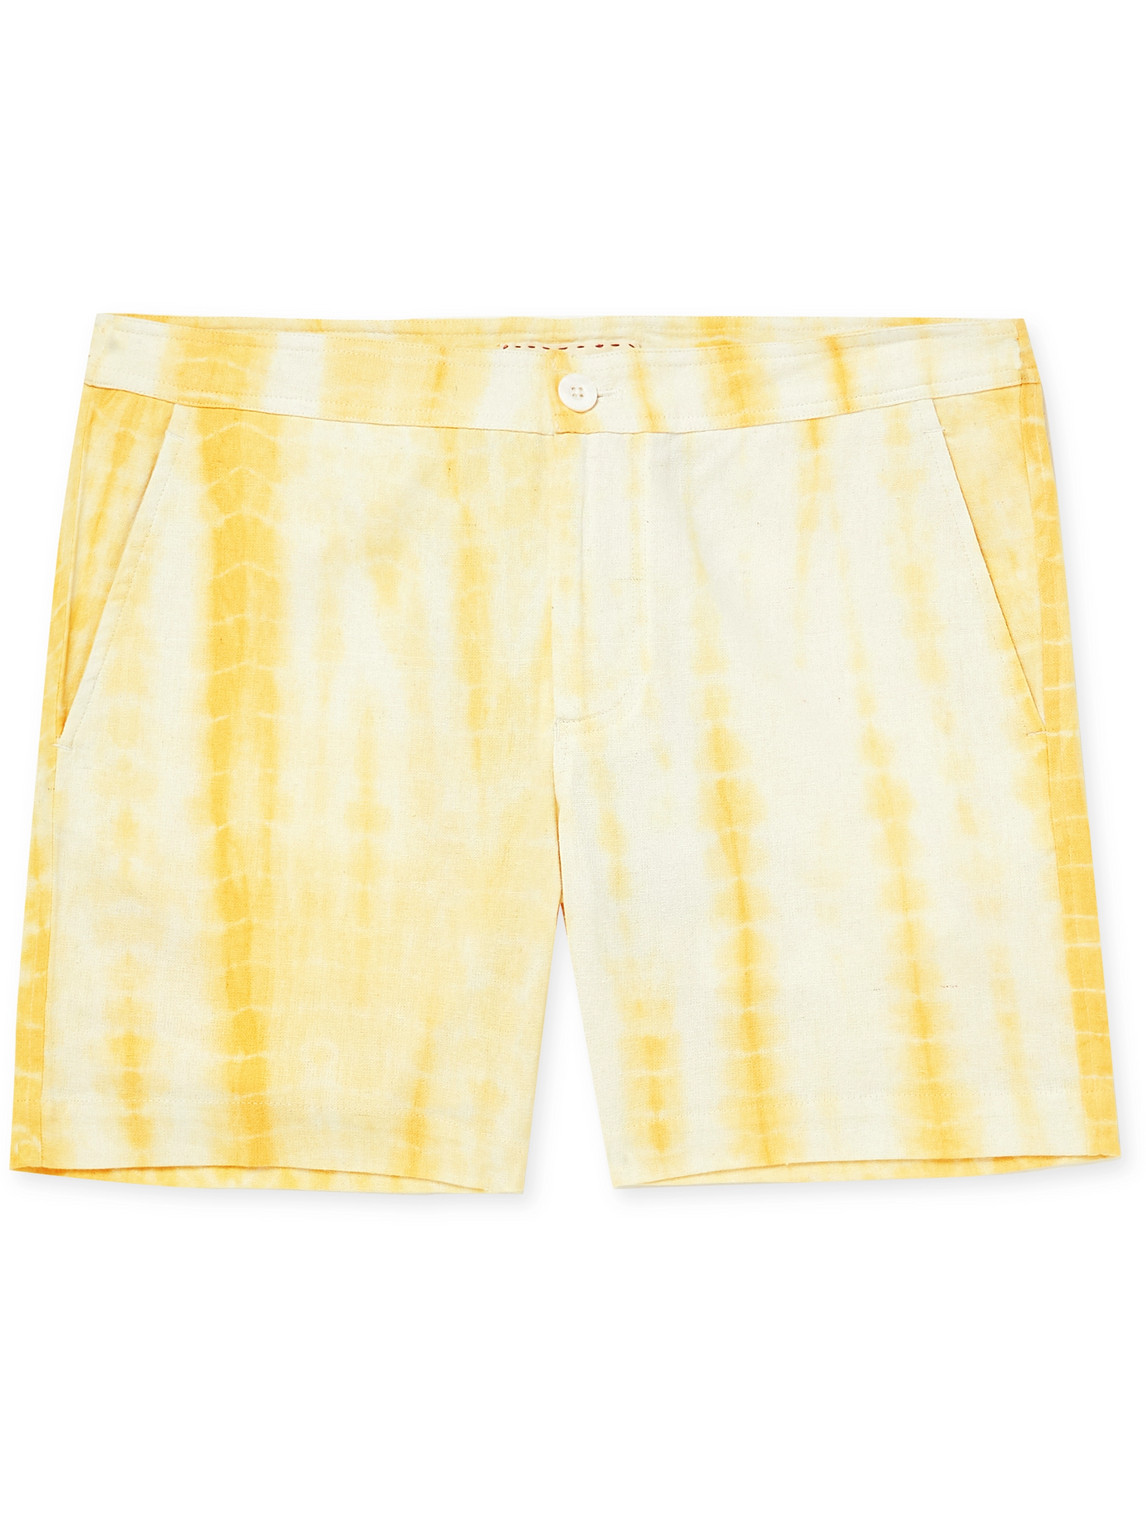 Pines Tie-Dyed Cotton Shorts